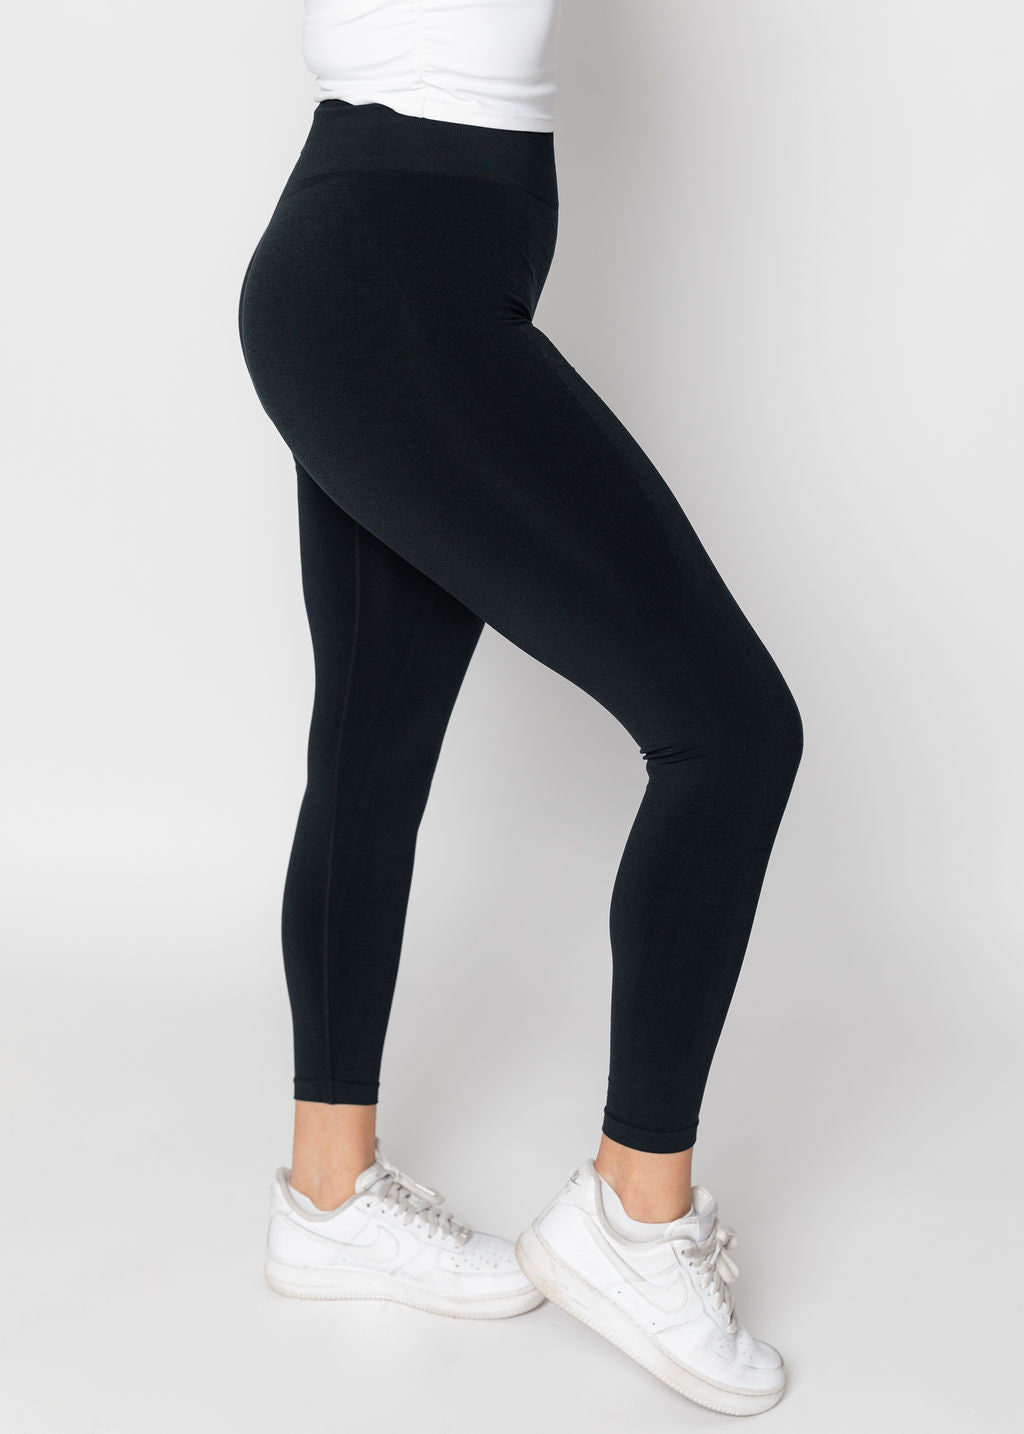 Obsession® Shapewear Official  Scrunch Butt Lifting Leggings